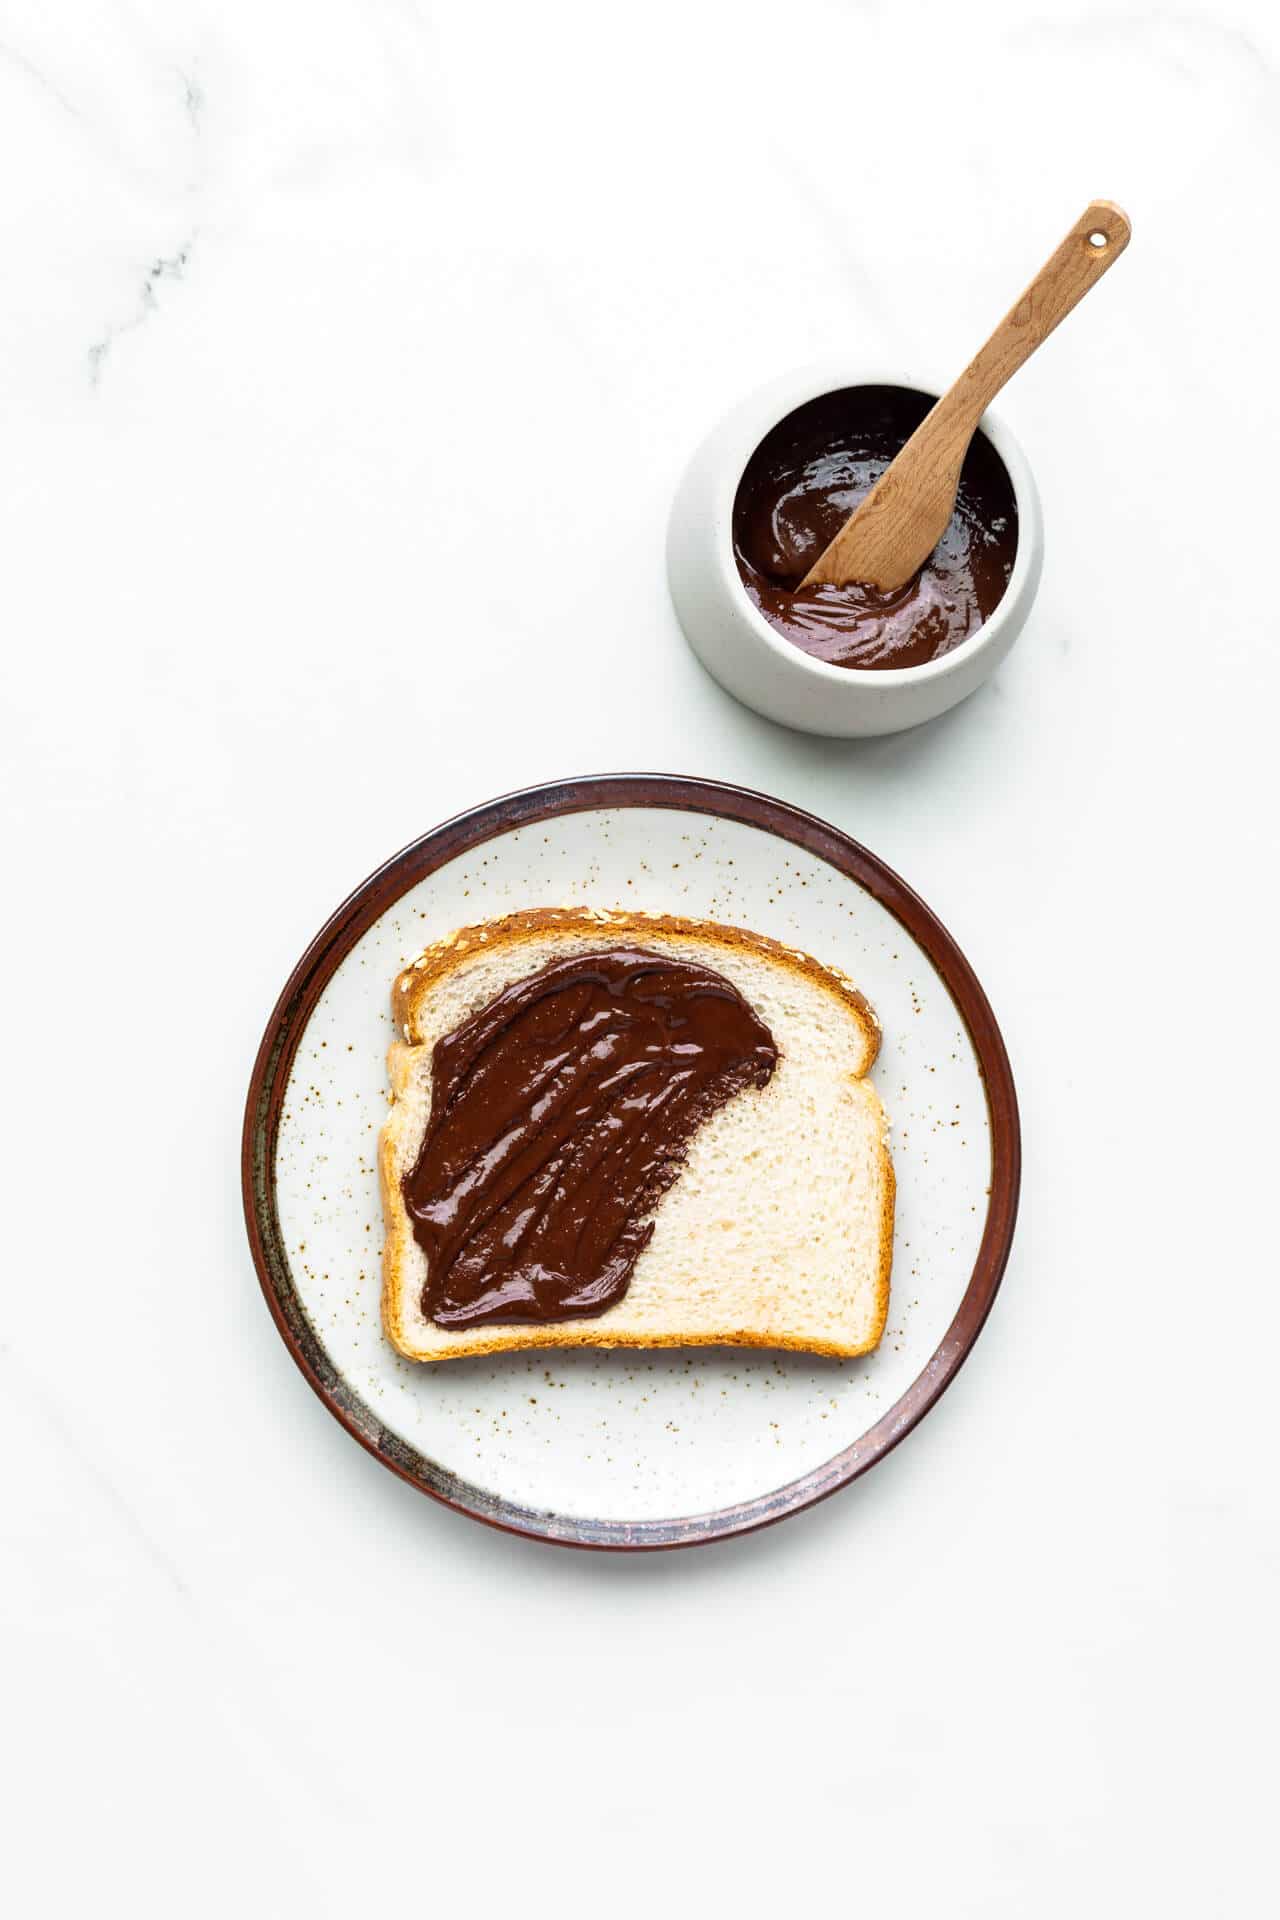 Chocolate peanut butter partly spread on a slice of white sandwich bread set on a ceramic plate with jar of spread and wood knife.